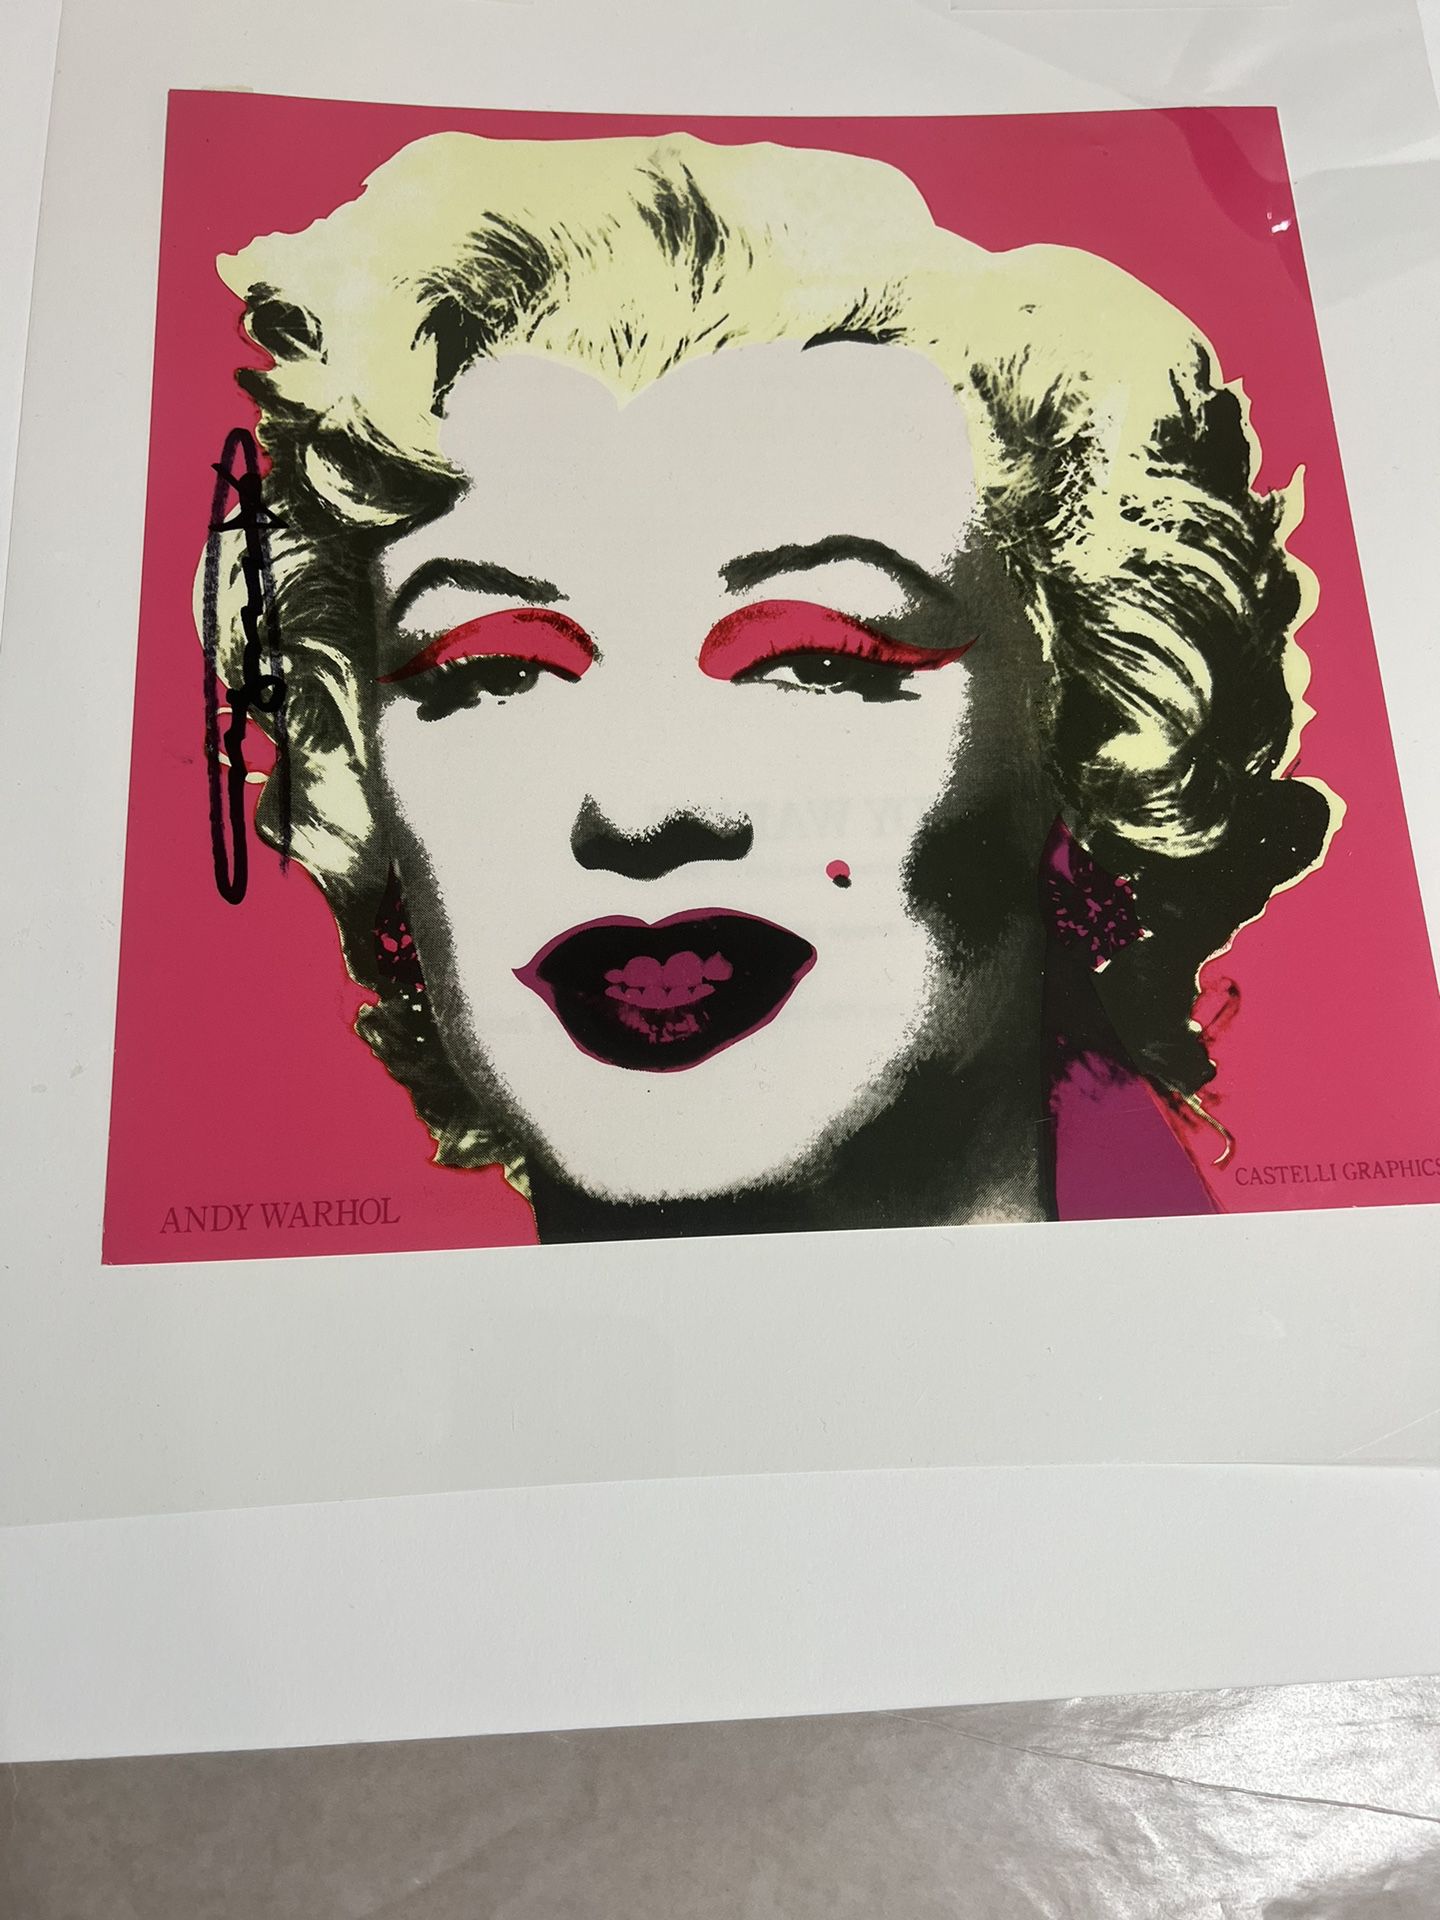 ANDY WARHOL - MARILYN, HAND SIGNED